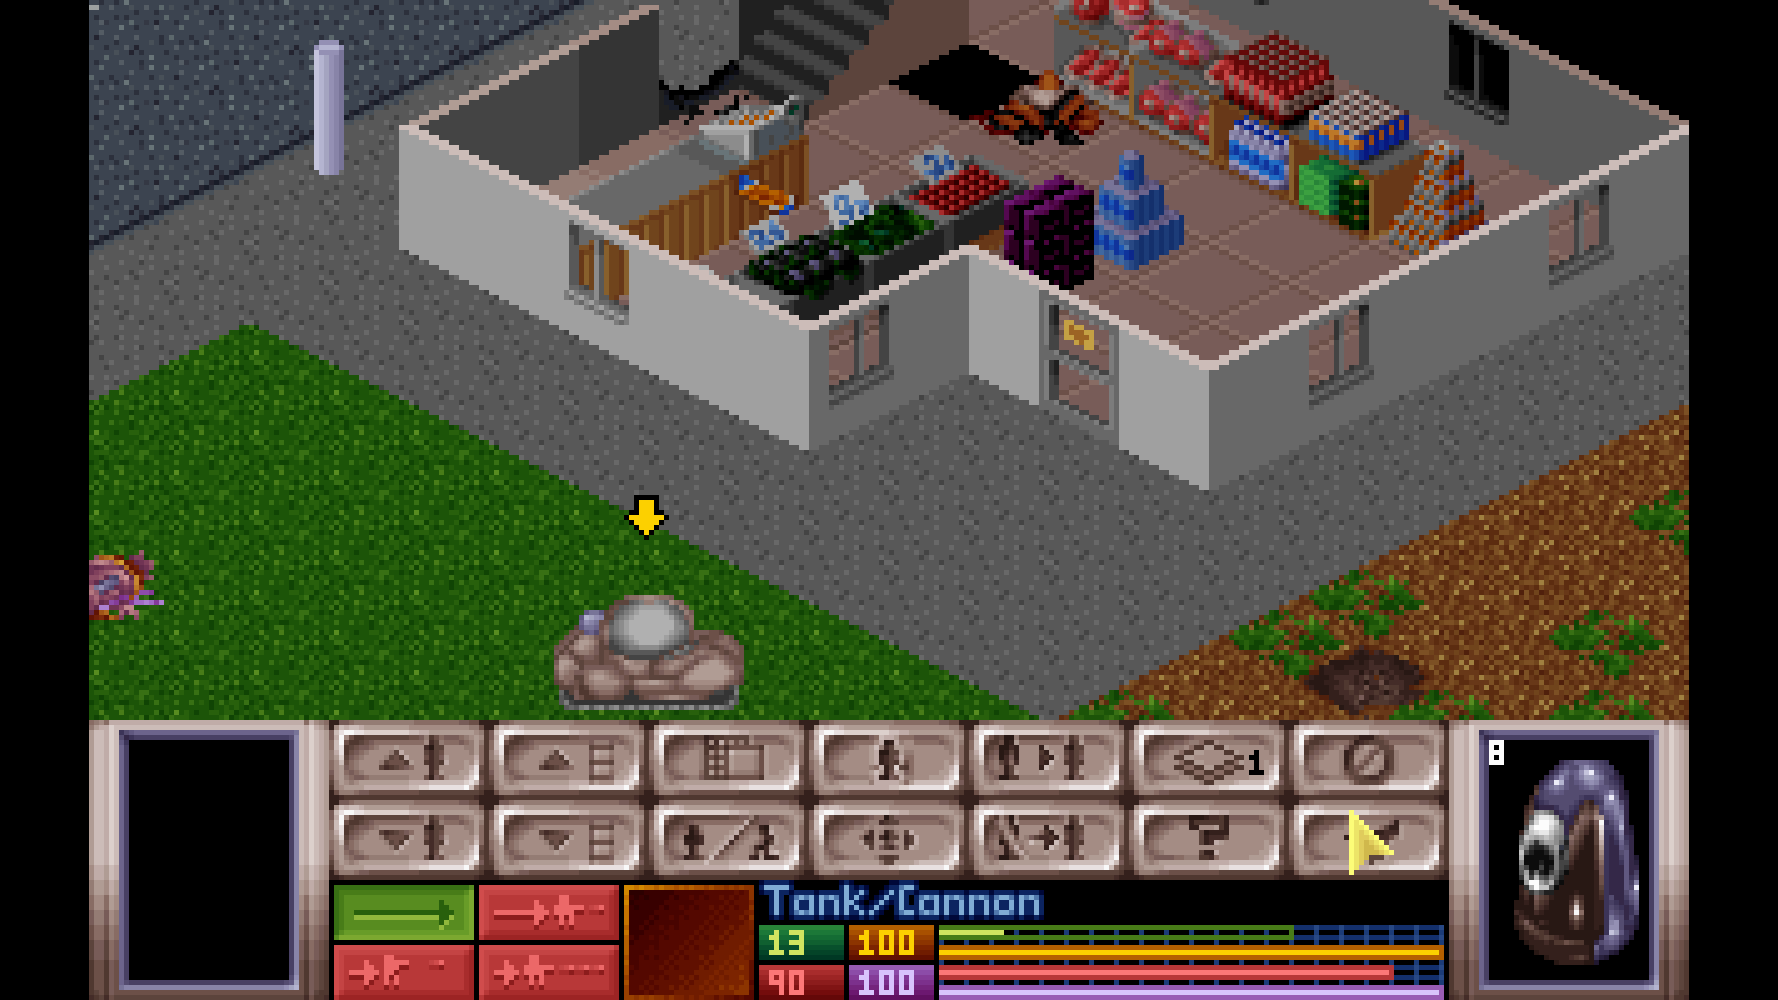 Aliens could hide in structures, but flexible options such as having units crouch and fire heavy weaponry like RPGs to blast walls gave players the strategic tools to conquer them. (Screenshot: MicroProse / MobyGames)